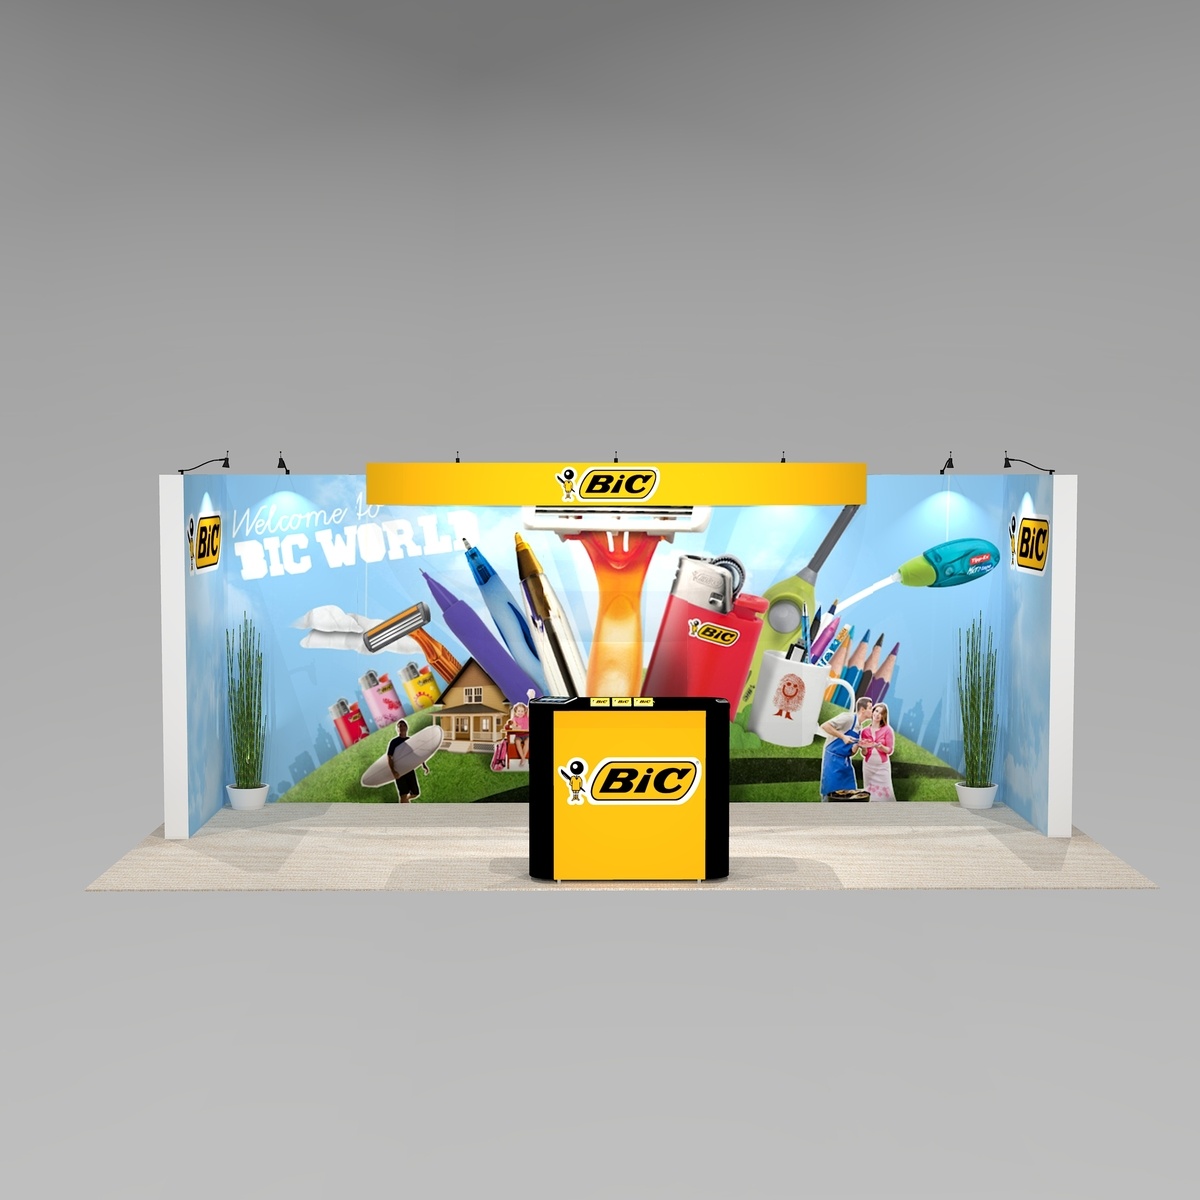 Giant Mural trade show exhibit design SHA1020 Graphic Package C